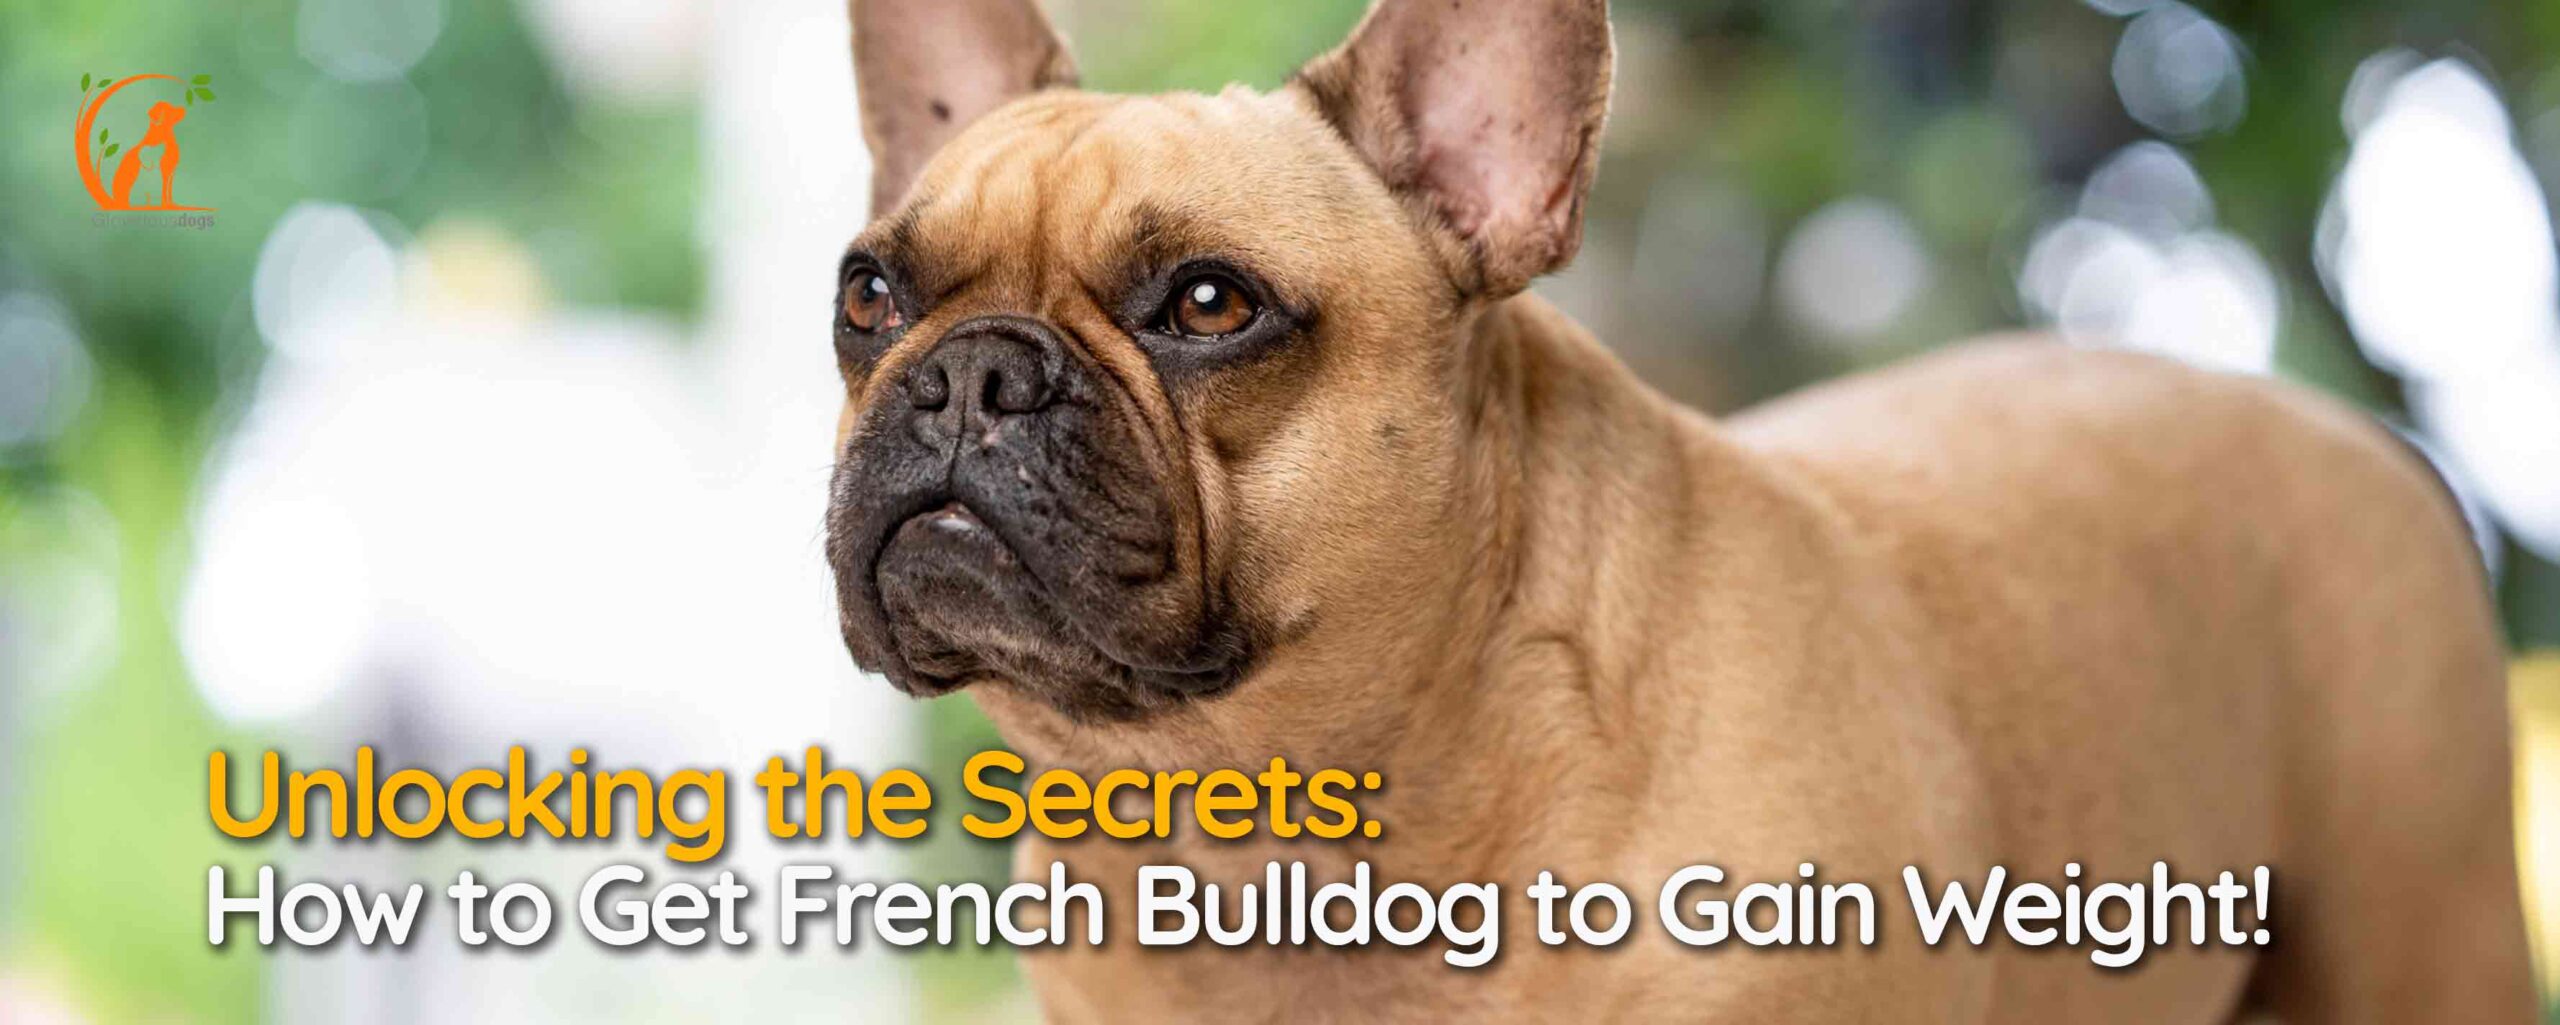 Unlocking the Secrets: How to Get French Bulldog to Gain Weight!